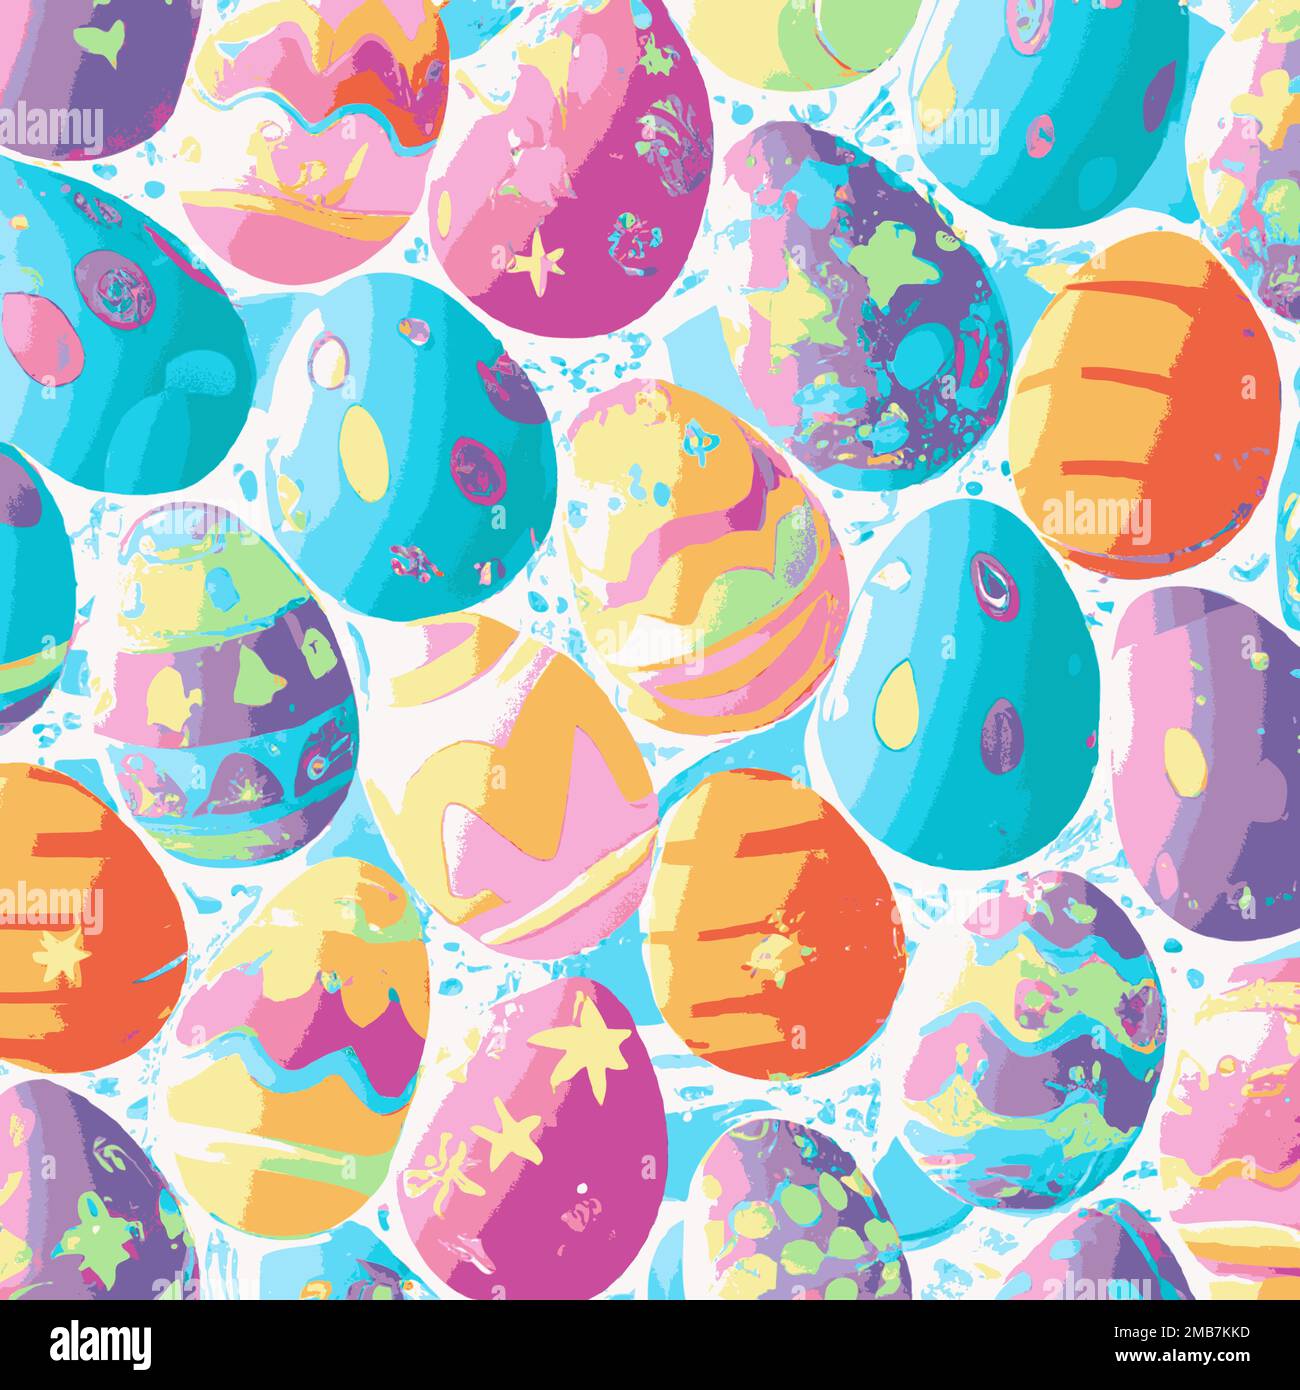 Illustration of many colorful decorated Easter eggs background pattern, red, yellow, green, blue, bright and pastel Stock Vector